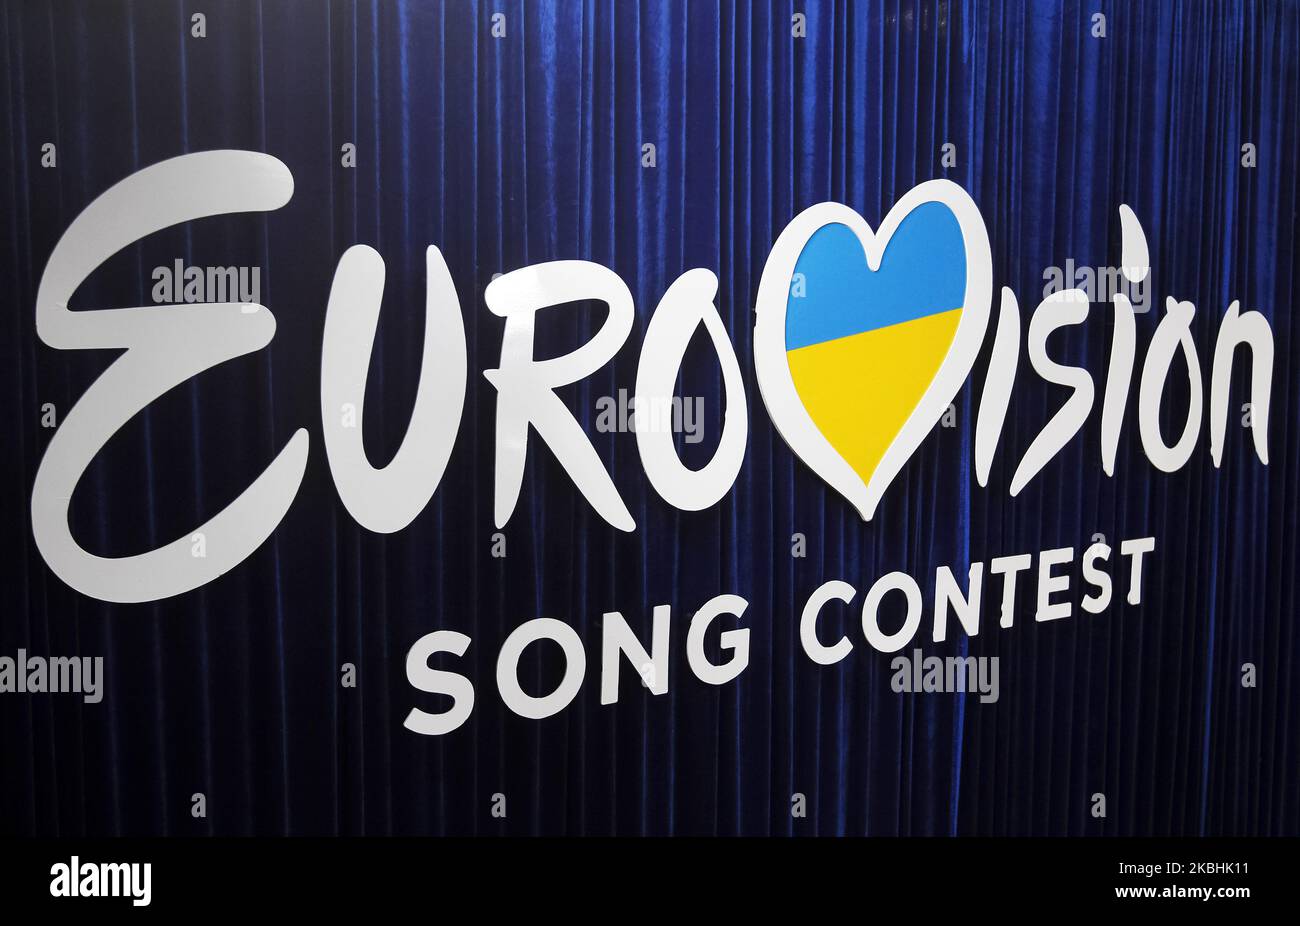 Eurovision Song Contest logo is seen during the 2020 Eurovision Song Contest (ESC) national selection show, broadcasted by STB and UA:Pershyi TV channels, in Kyiv, Ukraine, on 22 February, 2020. Ukrainian band Go A with song Solovey will represent Ukraine at the Eurovision Song Contest (ESC) that consists of two semi-finals, to be held on 12 and 14 May, and a grand final taking place at the Rotterdam Ahoy in Rotterdam, Netherlands, on 16 May 2020. (Photo by STR/NurPhoto) Stock Photo